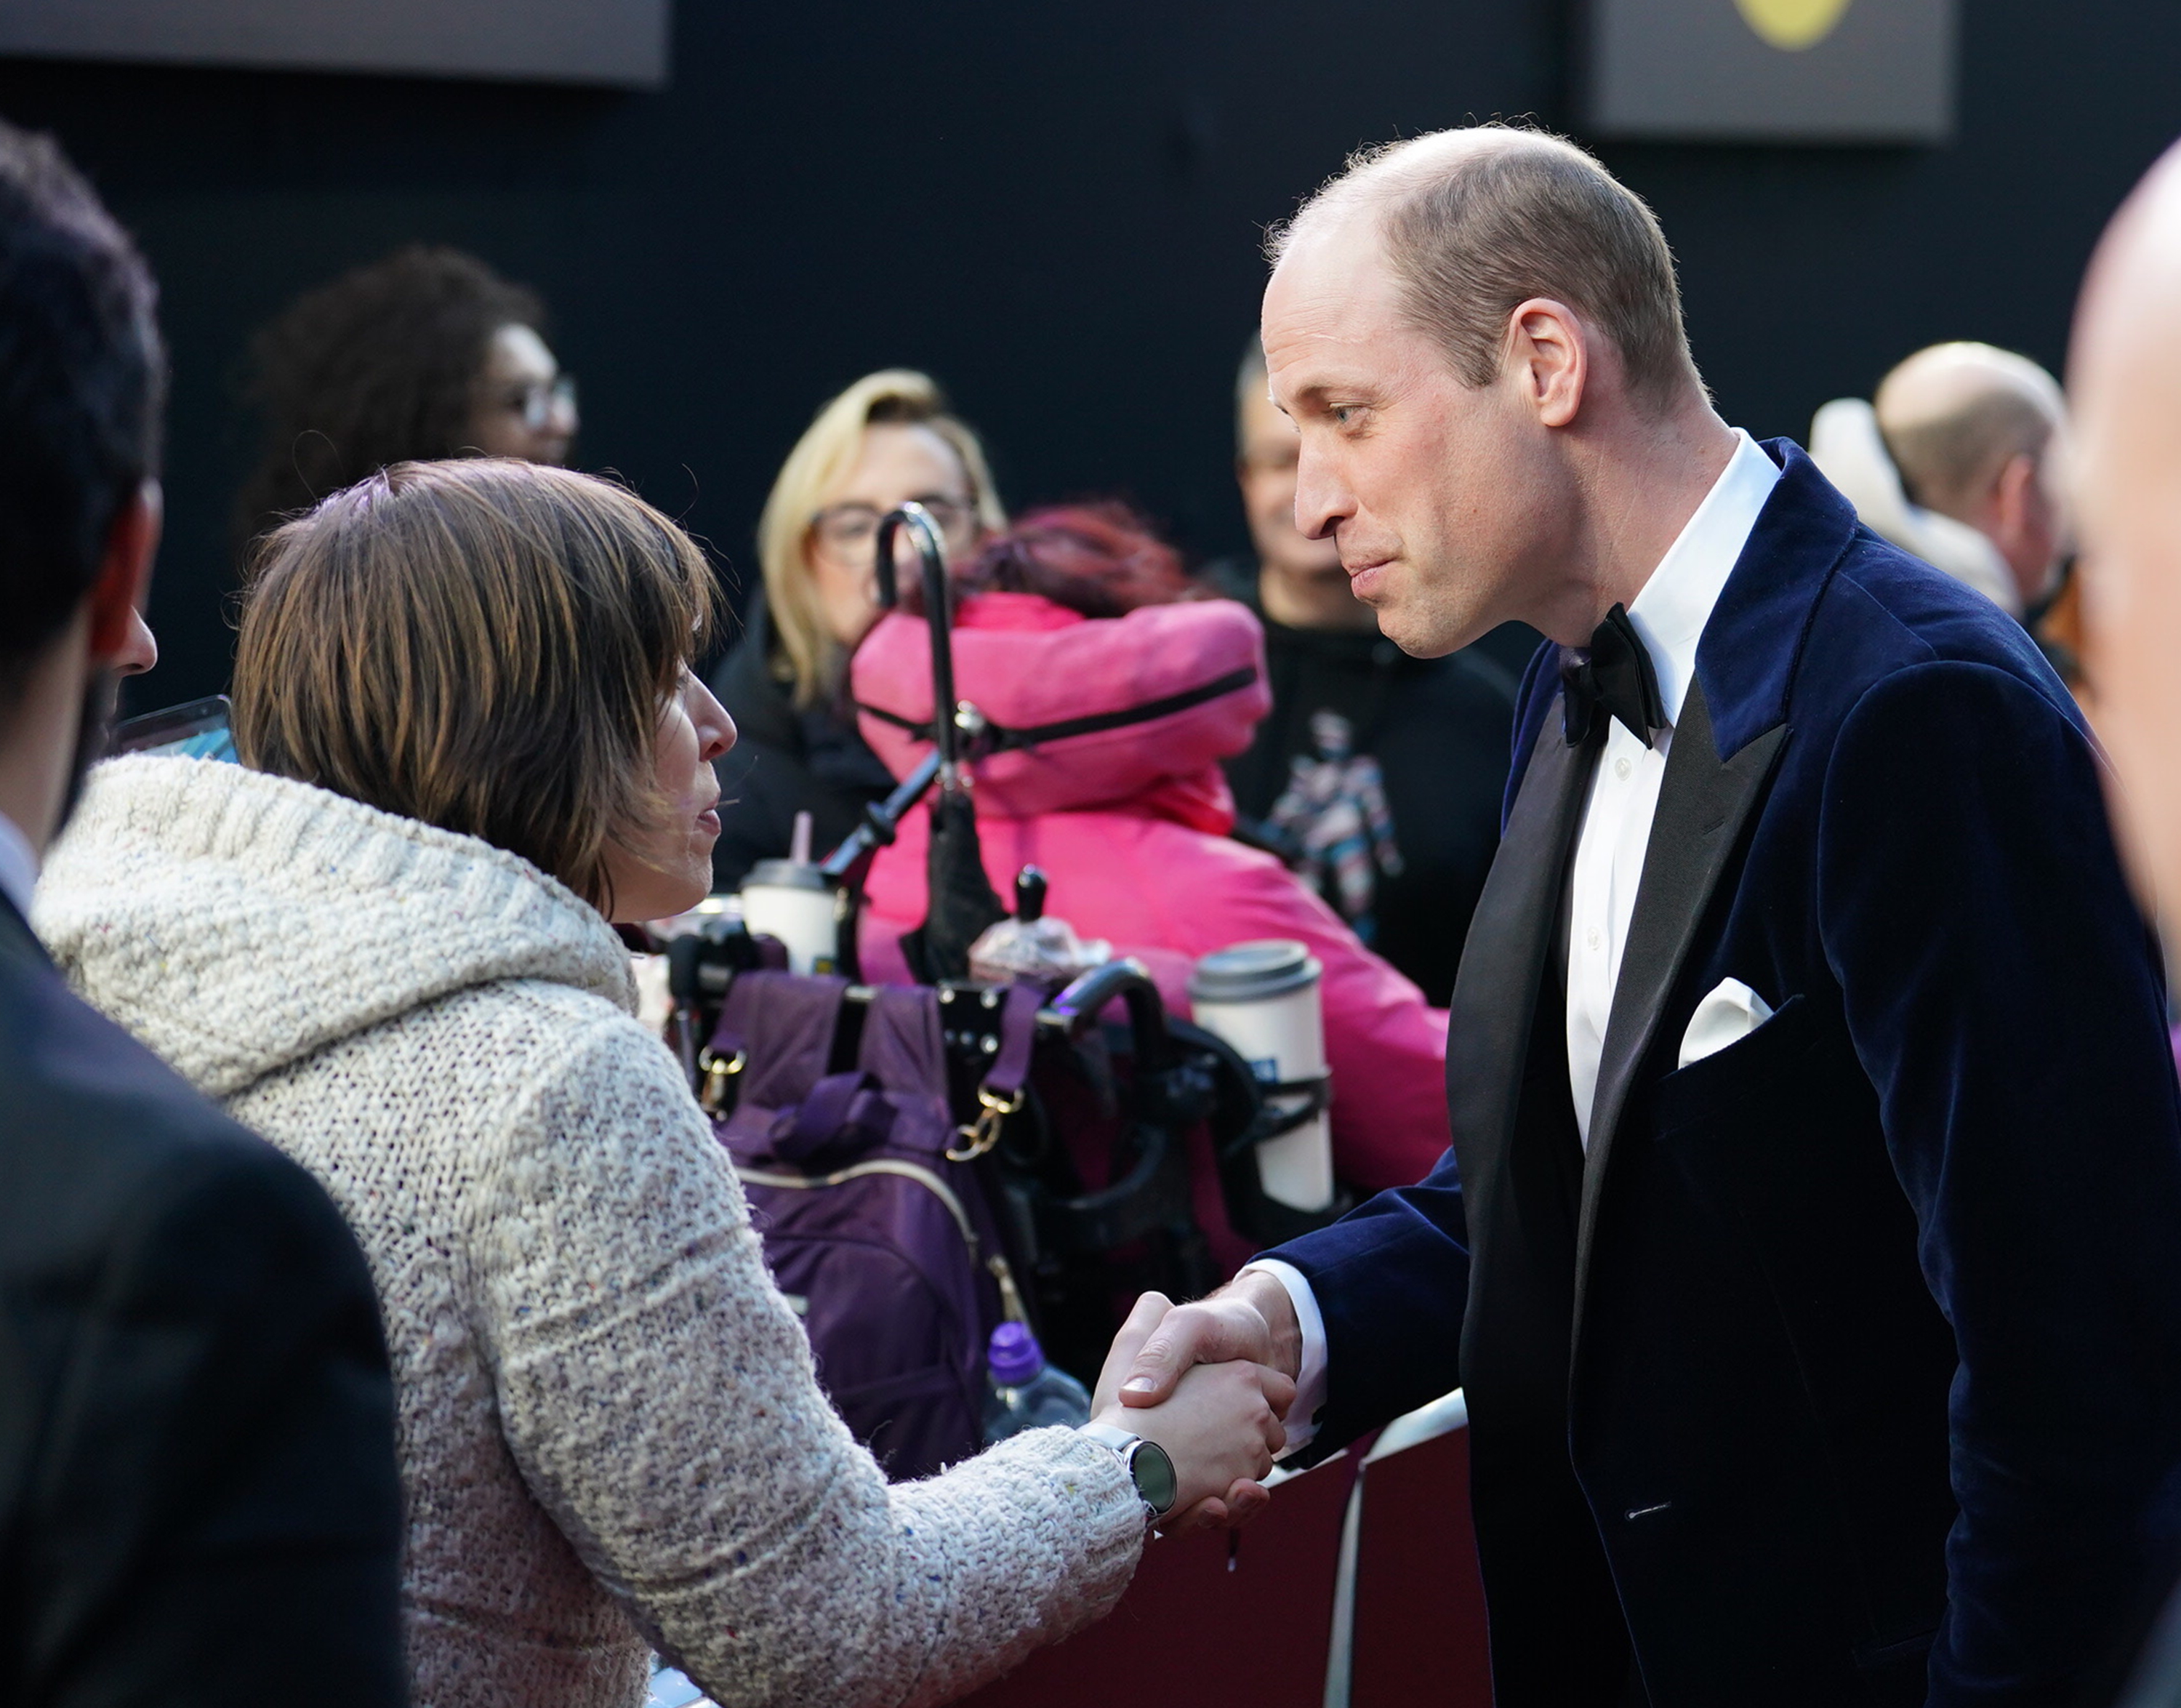 Prince Wiliam, president of Bafta, pauses to meet and greet fans on the red carpet